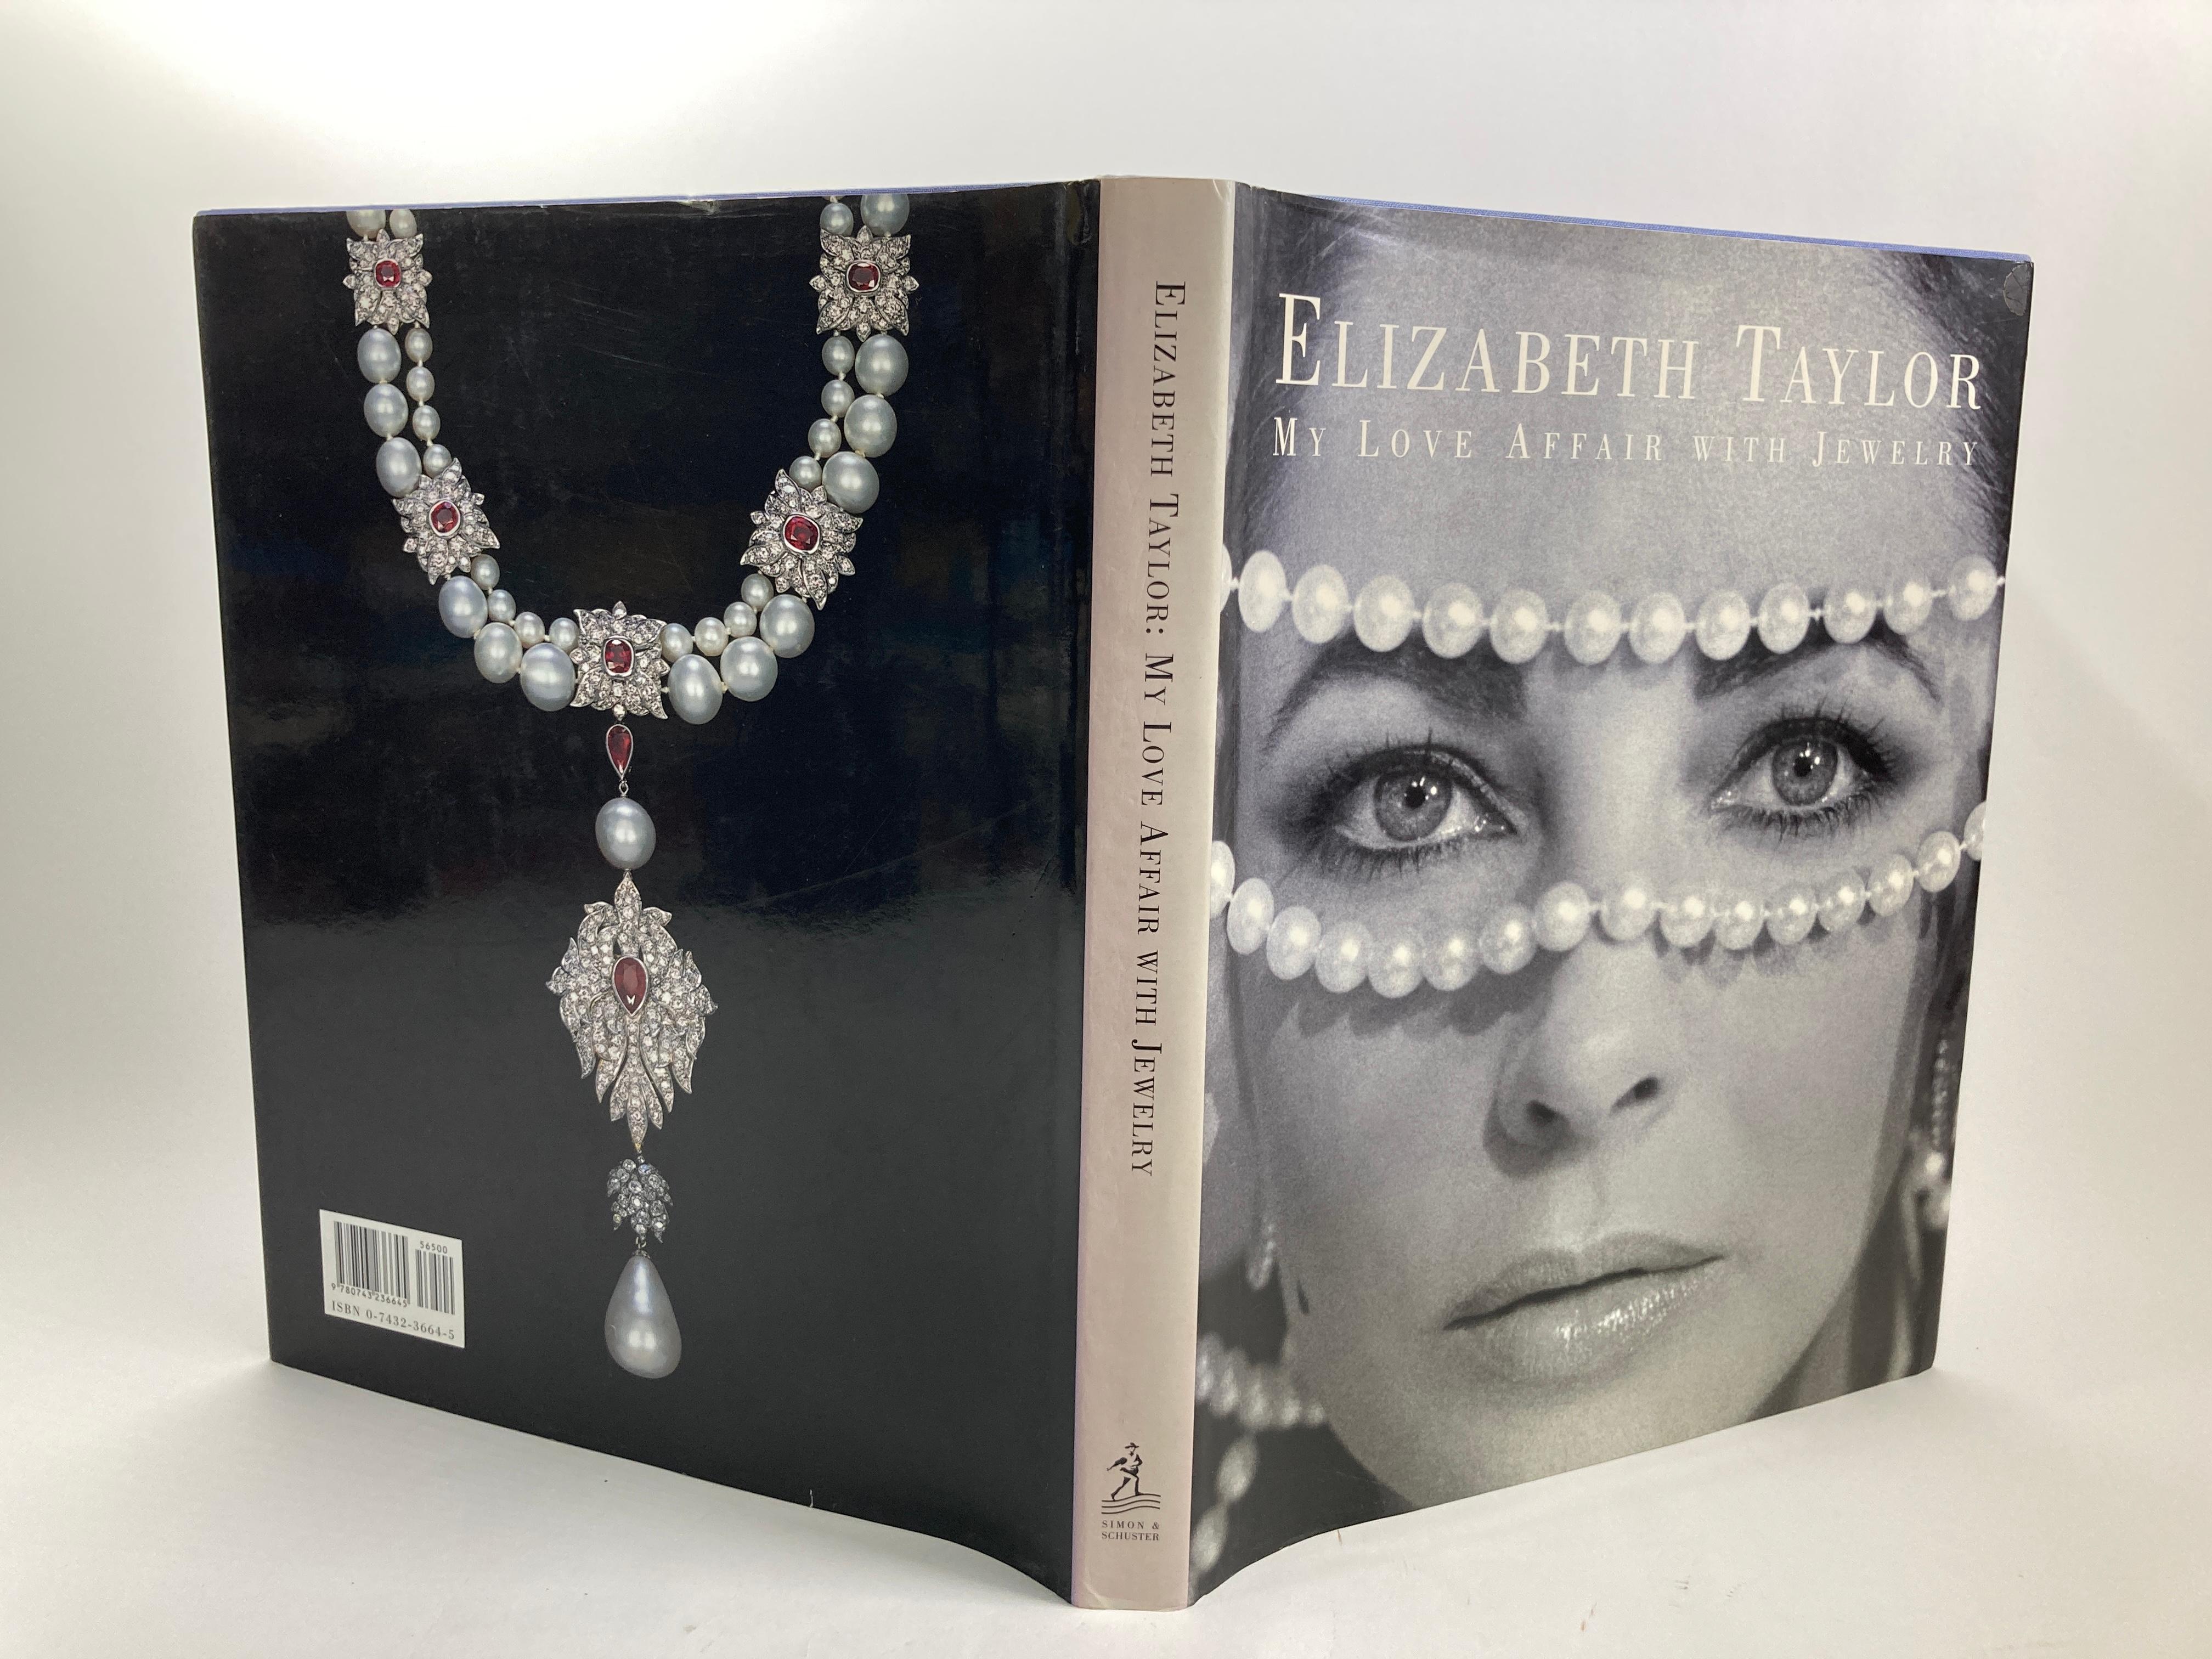  Elizabeth Taylor: My Love Affair With Jewelry 1st Edition Hardcover Book 6